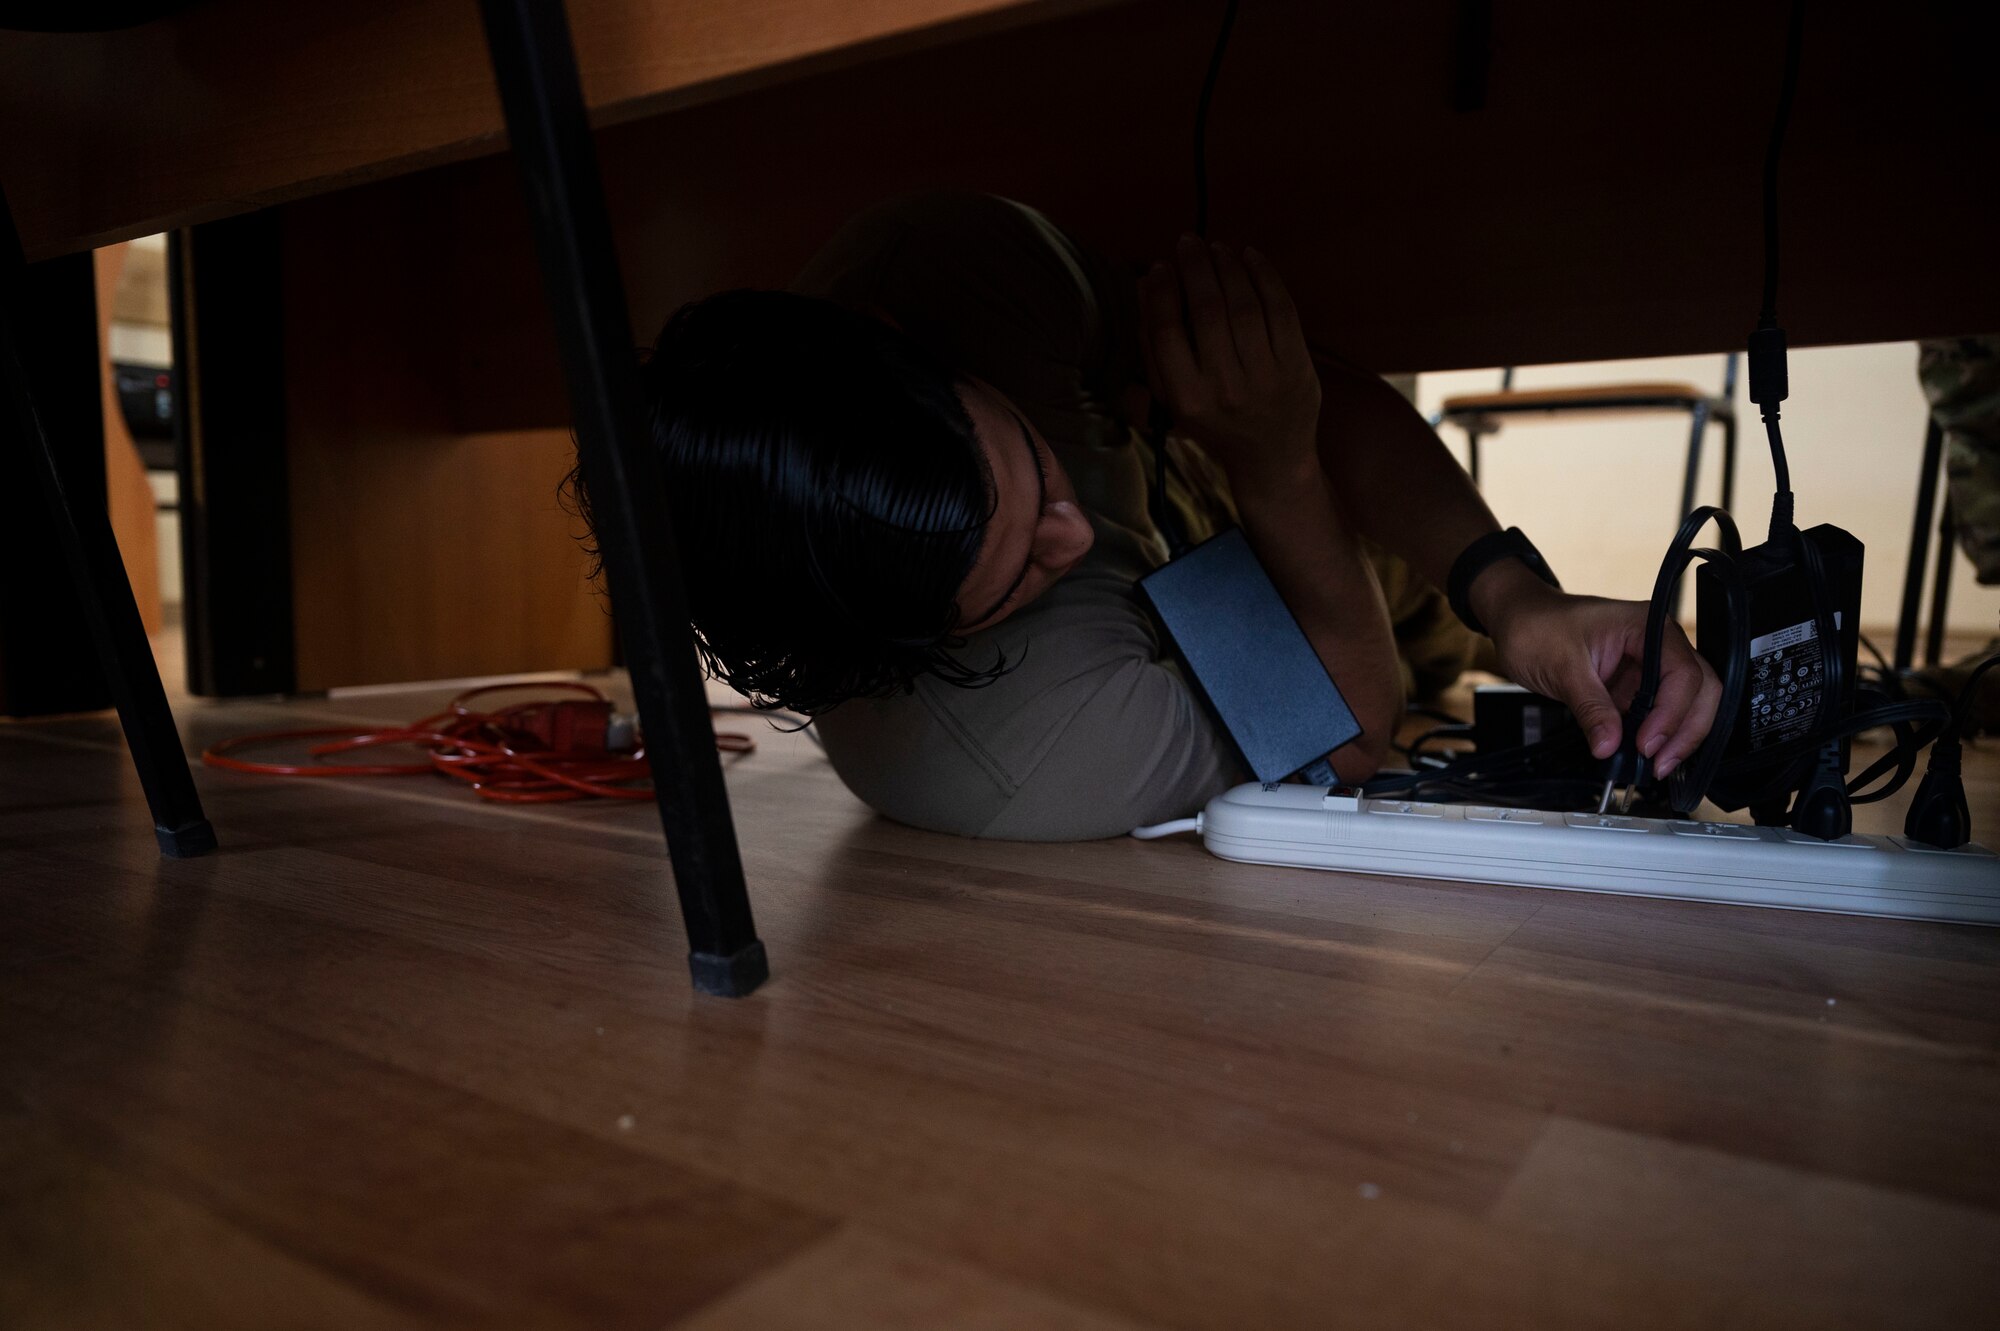 U.S. Air Force Staff Sgt. Jacob Morin, 1st Combat Communications Squadron client systems technician, connects power cords into a power strip during exercise Agile Spirit 21